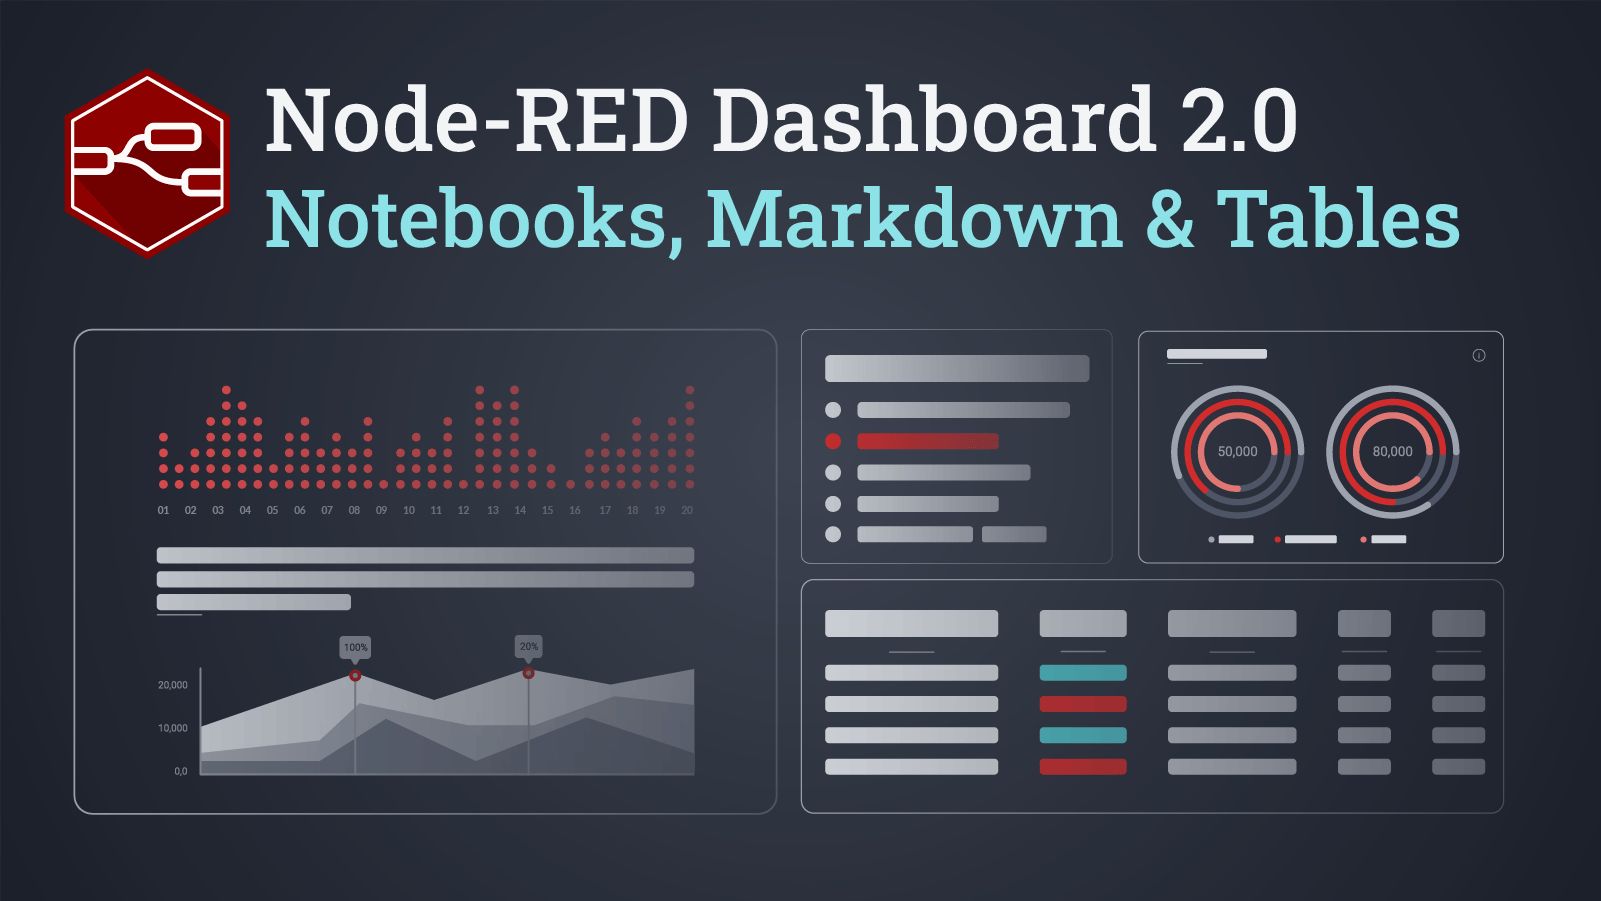 Image representing Dynamic Markdown, Tables & Notebooks with Dashboard 2.0